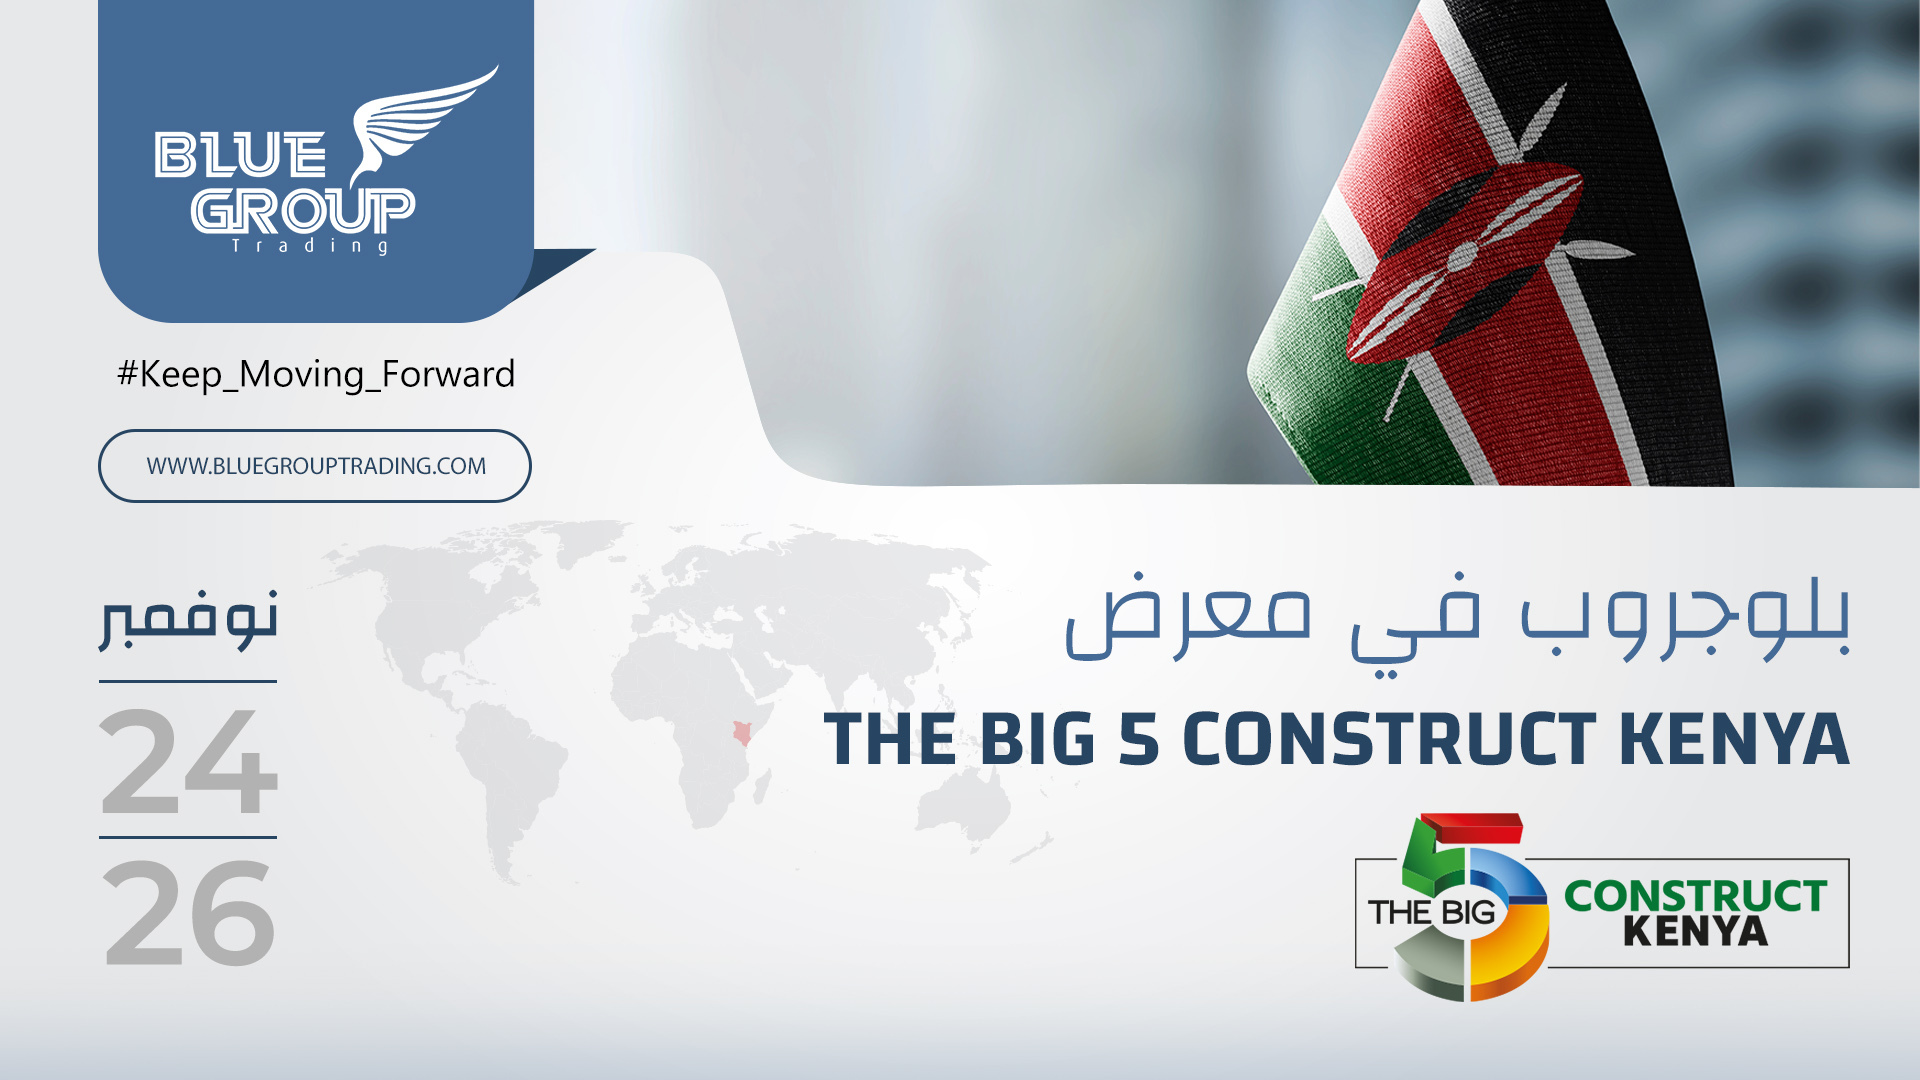 Blue Group At “The Big 5 Construct Kenya” Kenya’s most important construction event of the year.